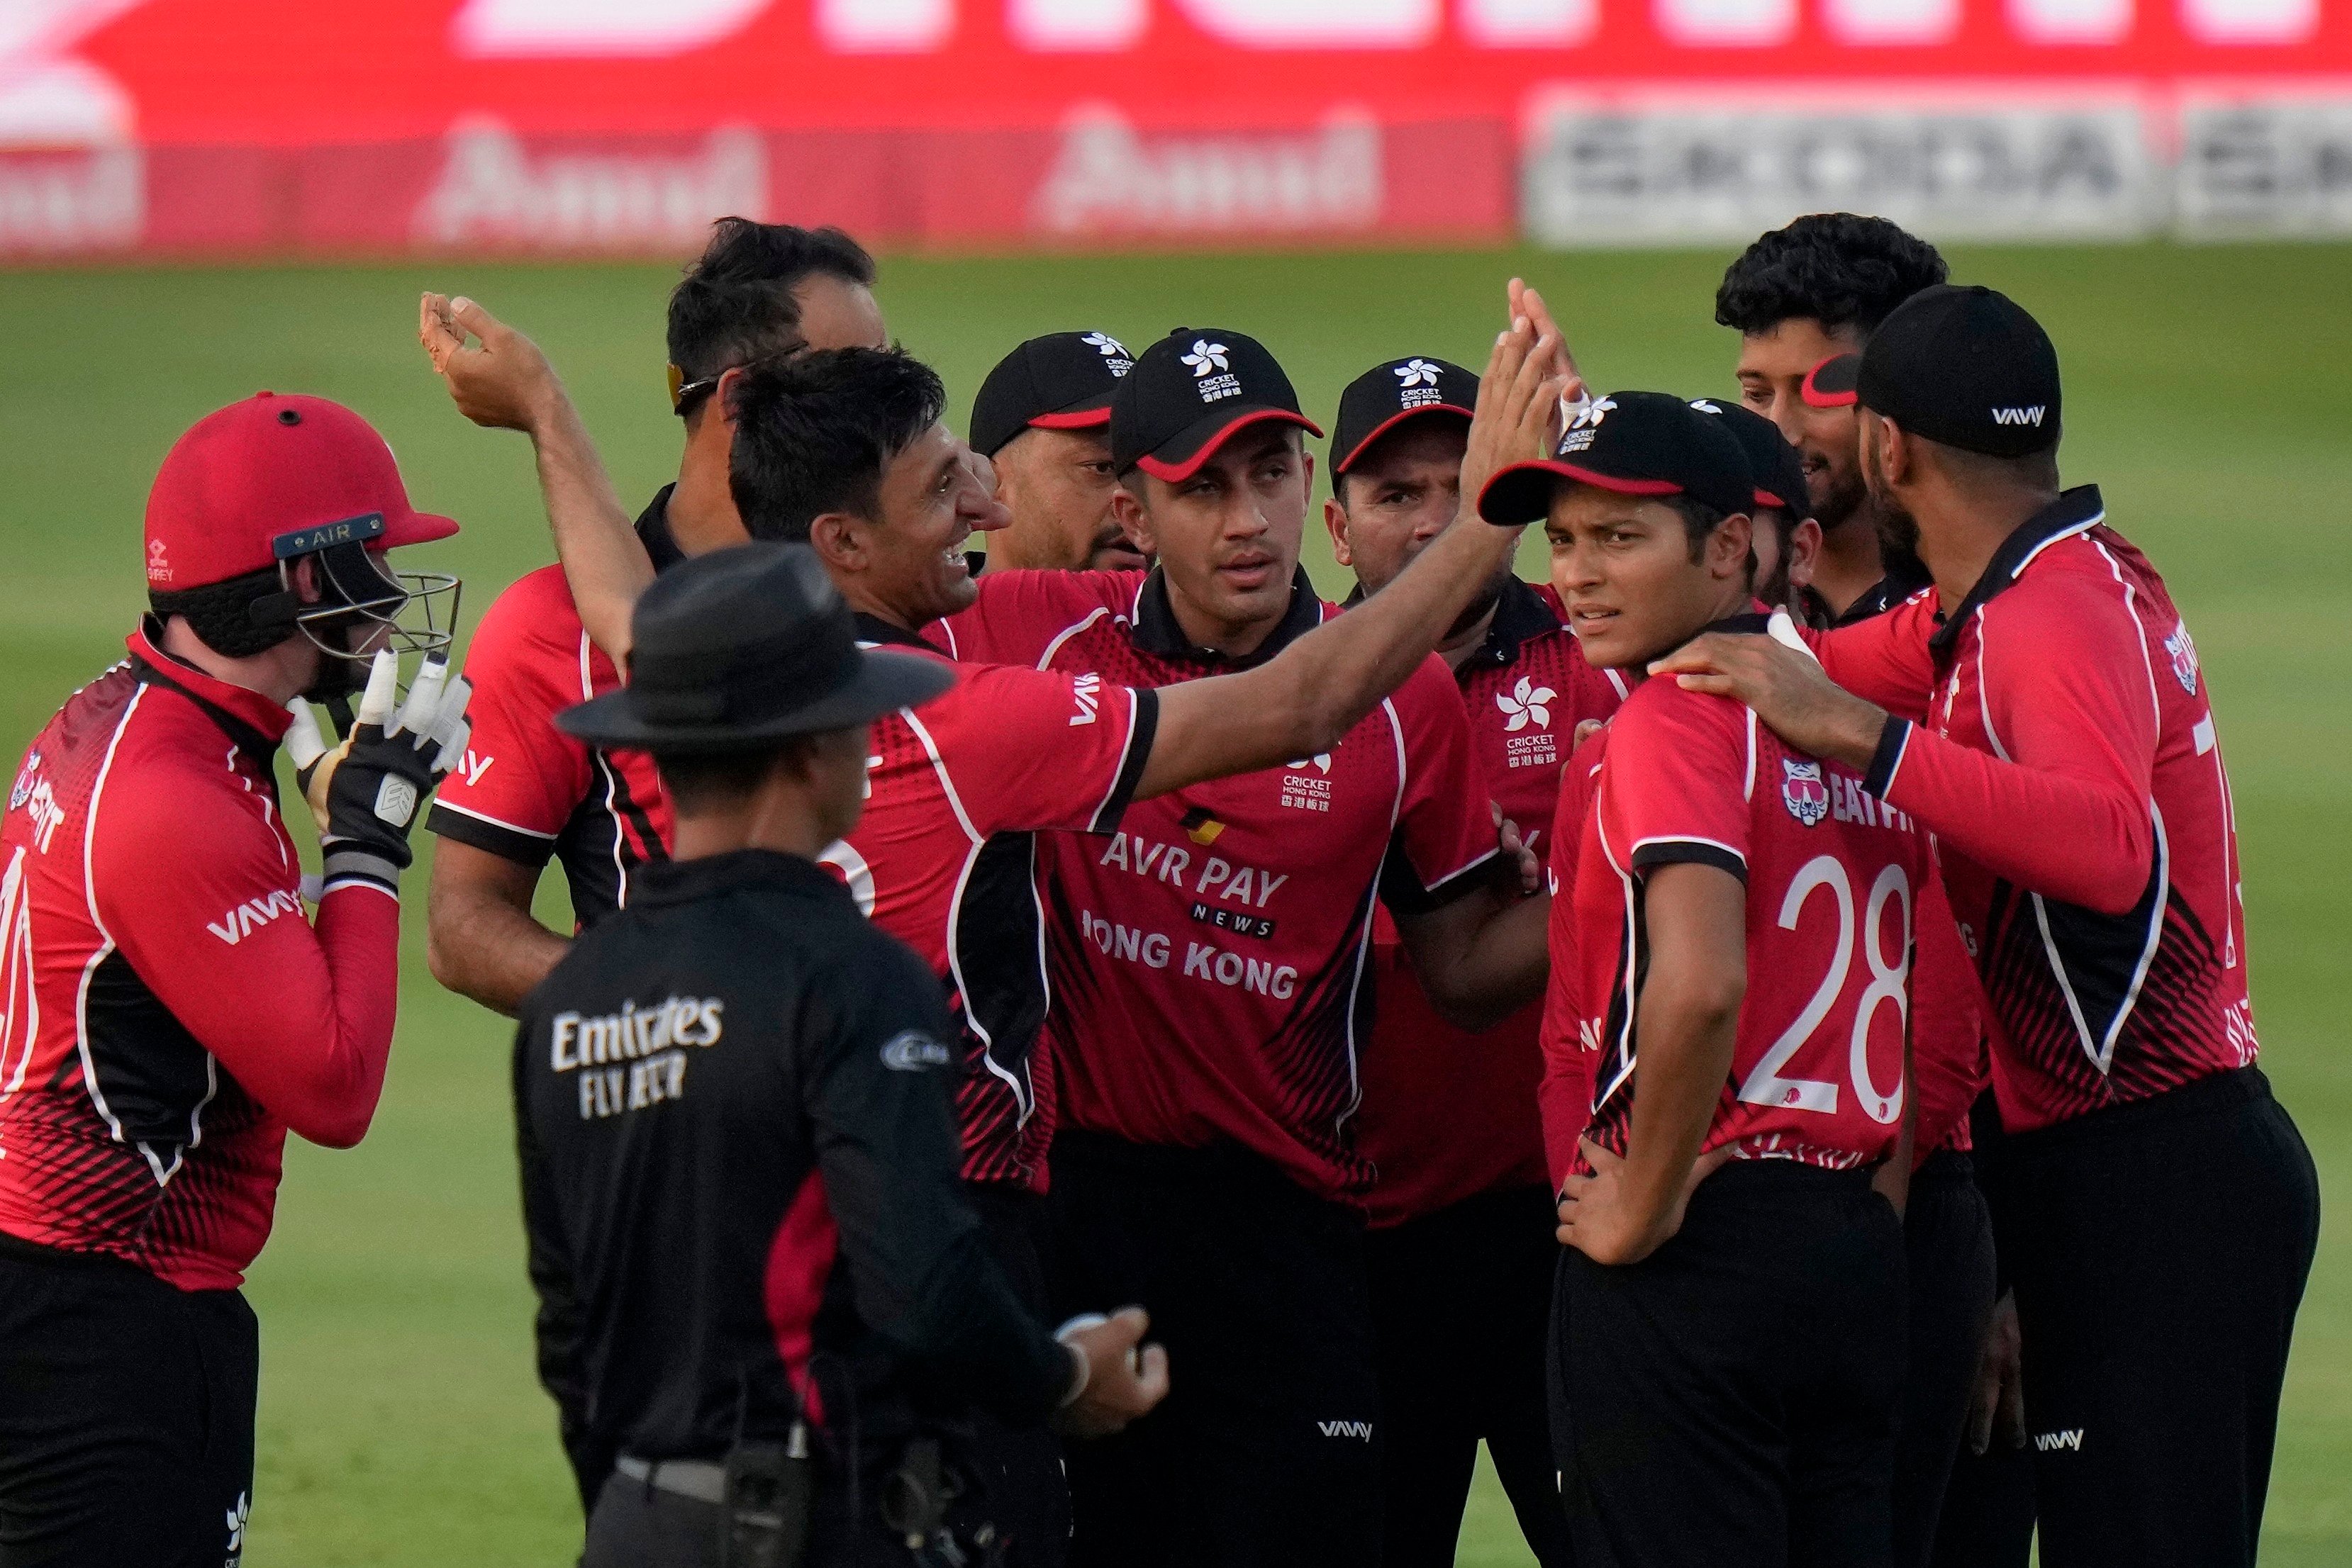 Hong Kong celebrate the wicket of Pakistan’s Babar Azam during their Asia Cup match in Sharjah on September 2, 2022. Photo: AP